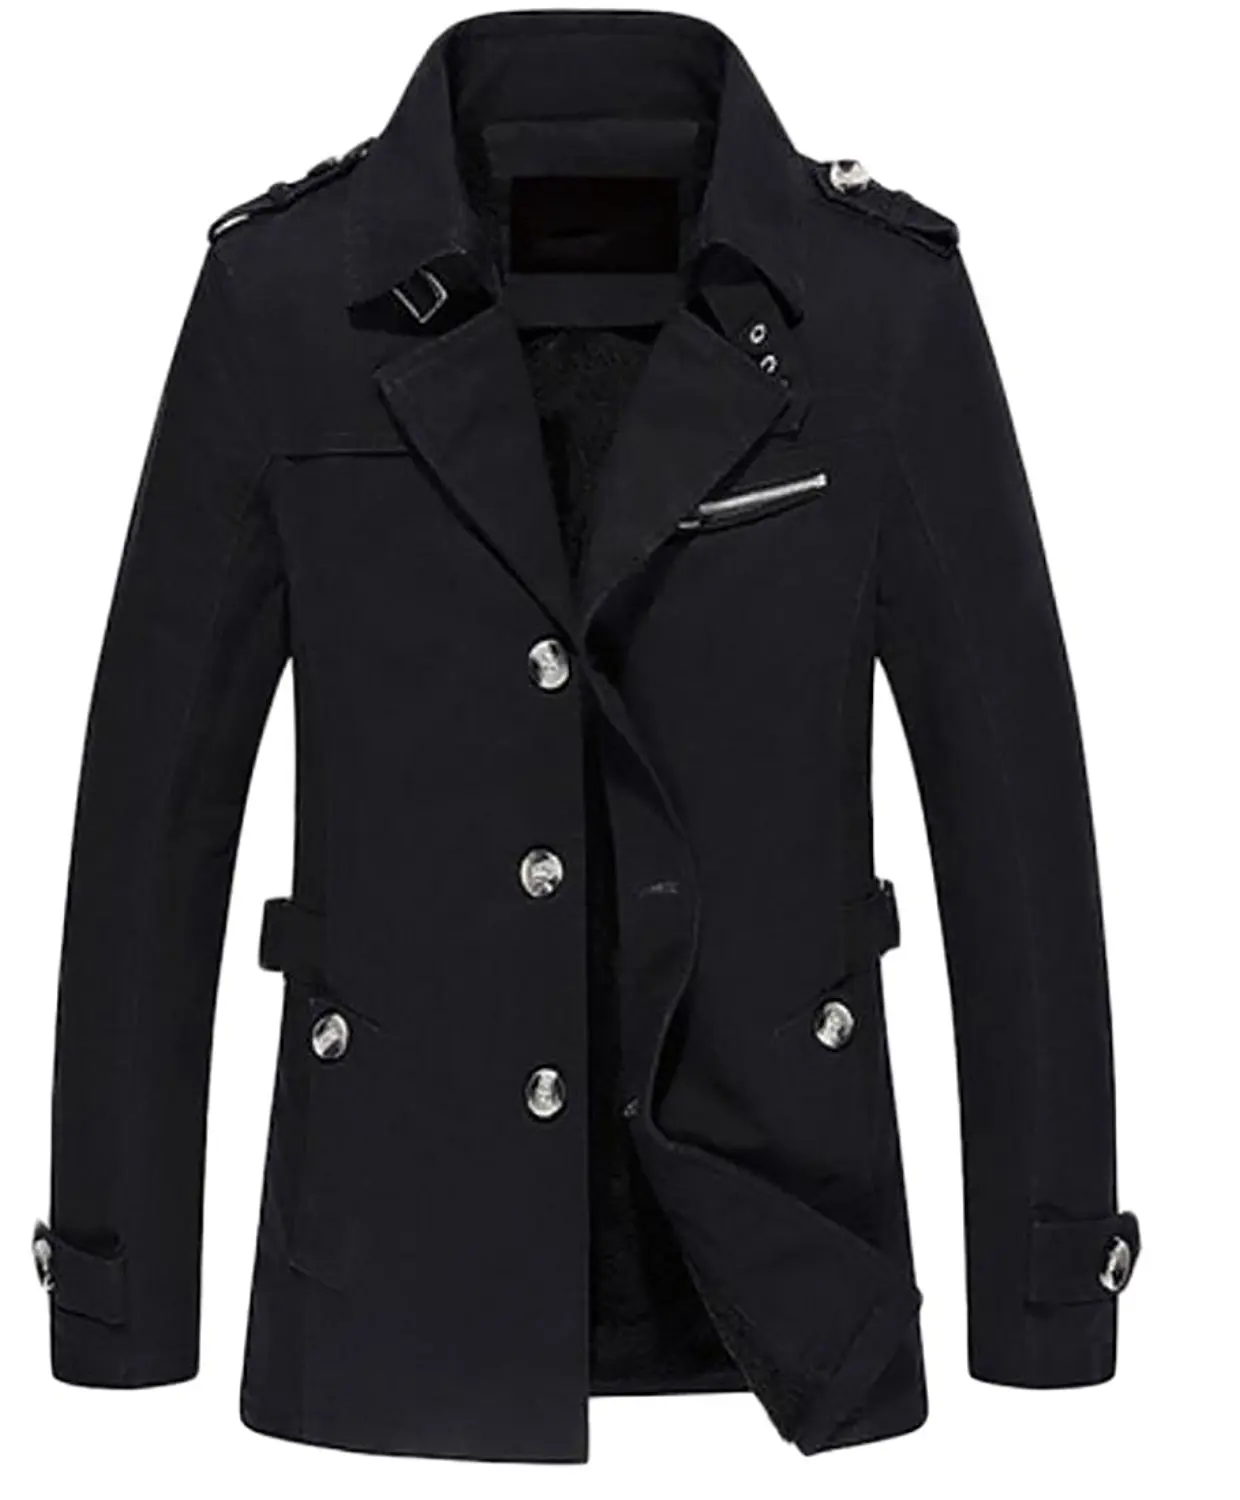 Cheap Fur Lined Trench Coat, find Fur Lined Trench Coat deals on line ...